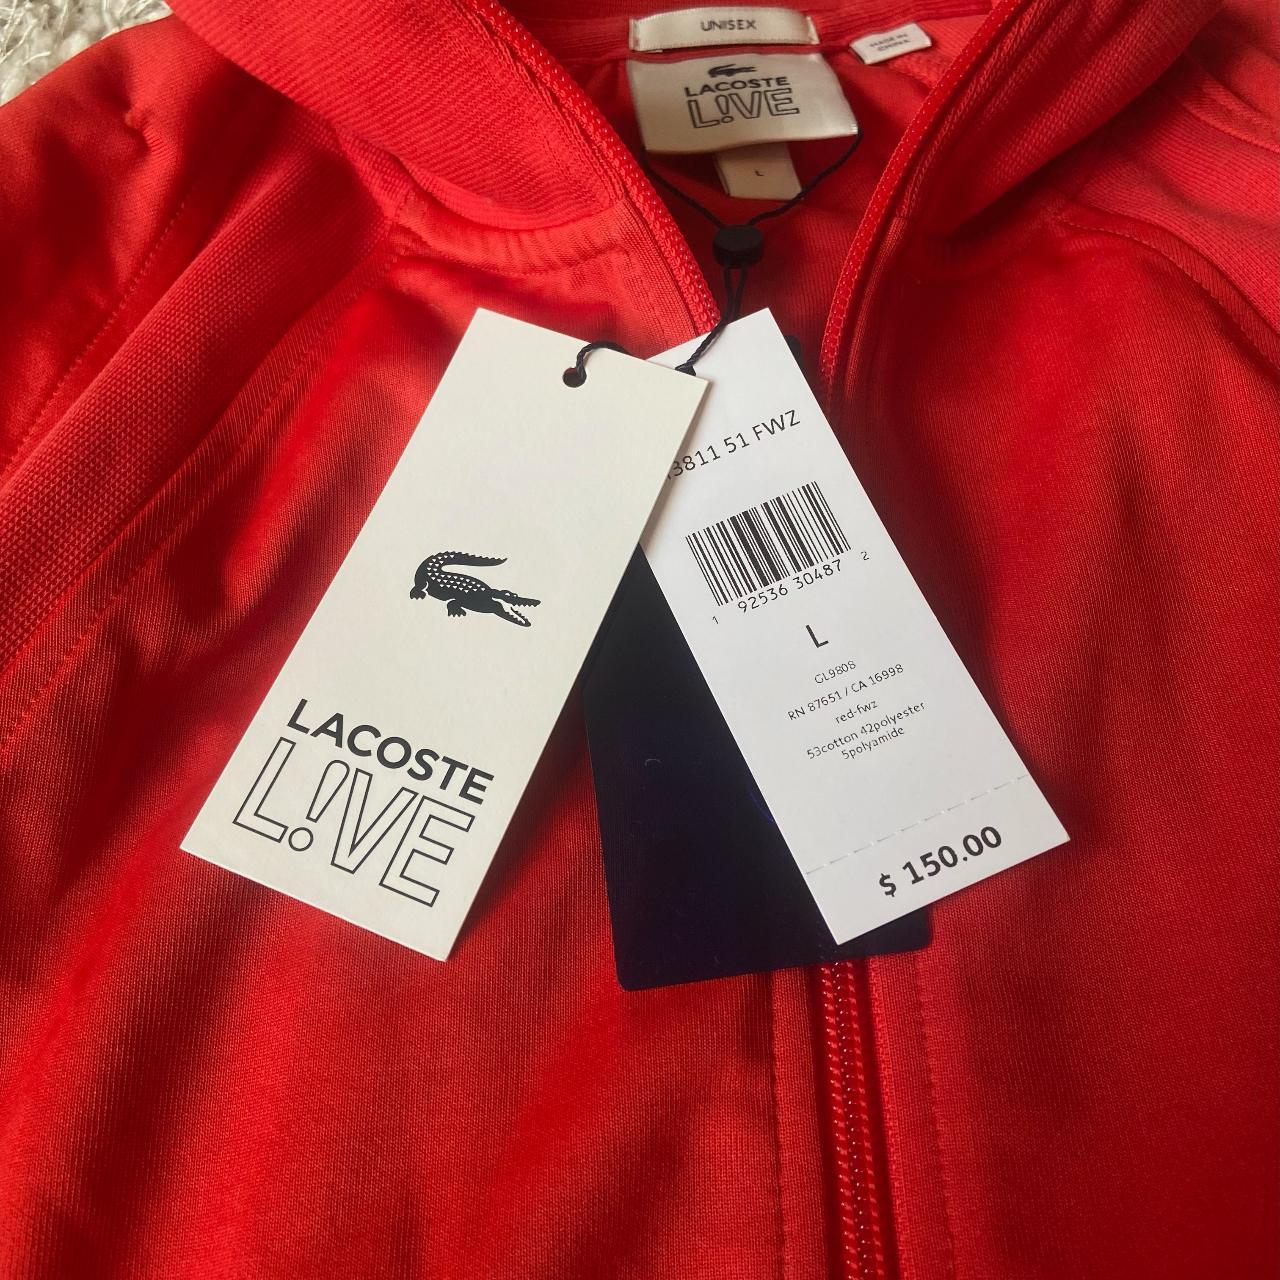 Lacoste Live Women's Red Jacket (3)